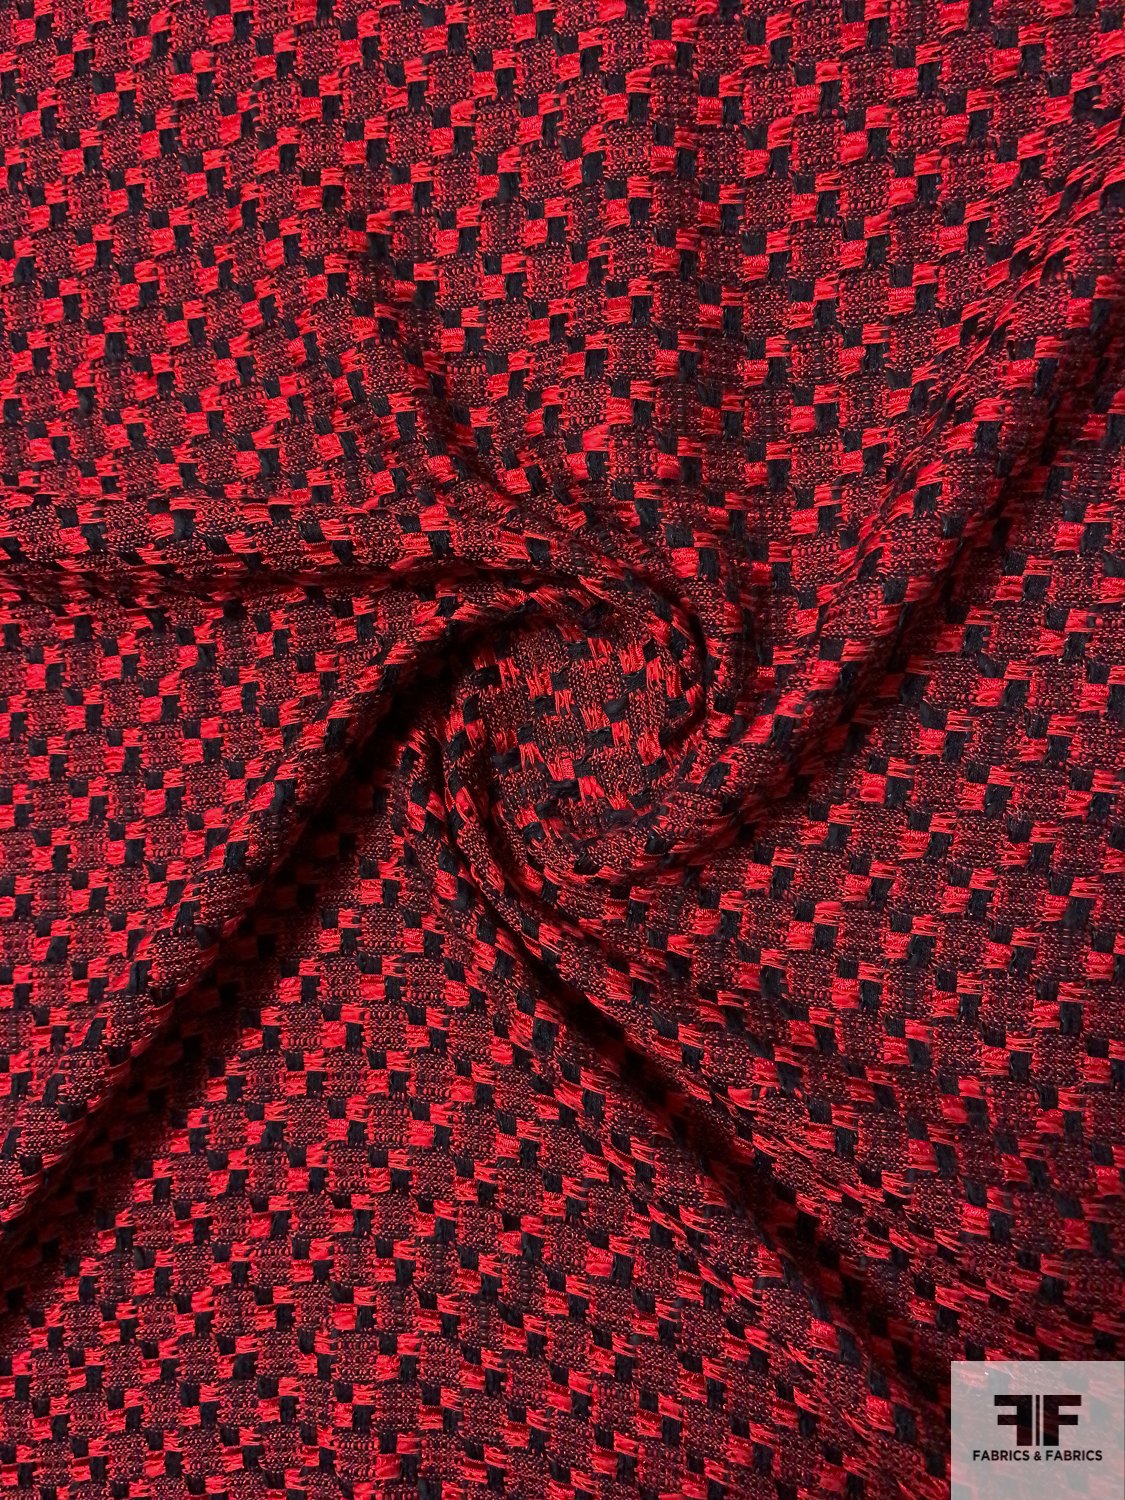 Made in England Cotton Blend Basketweave Tweed Suiting - Red / Black / White